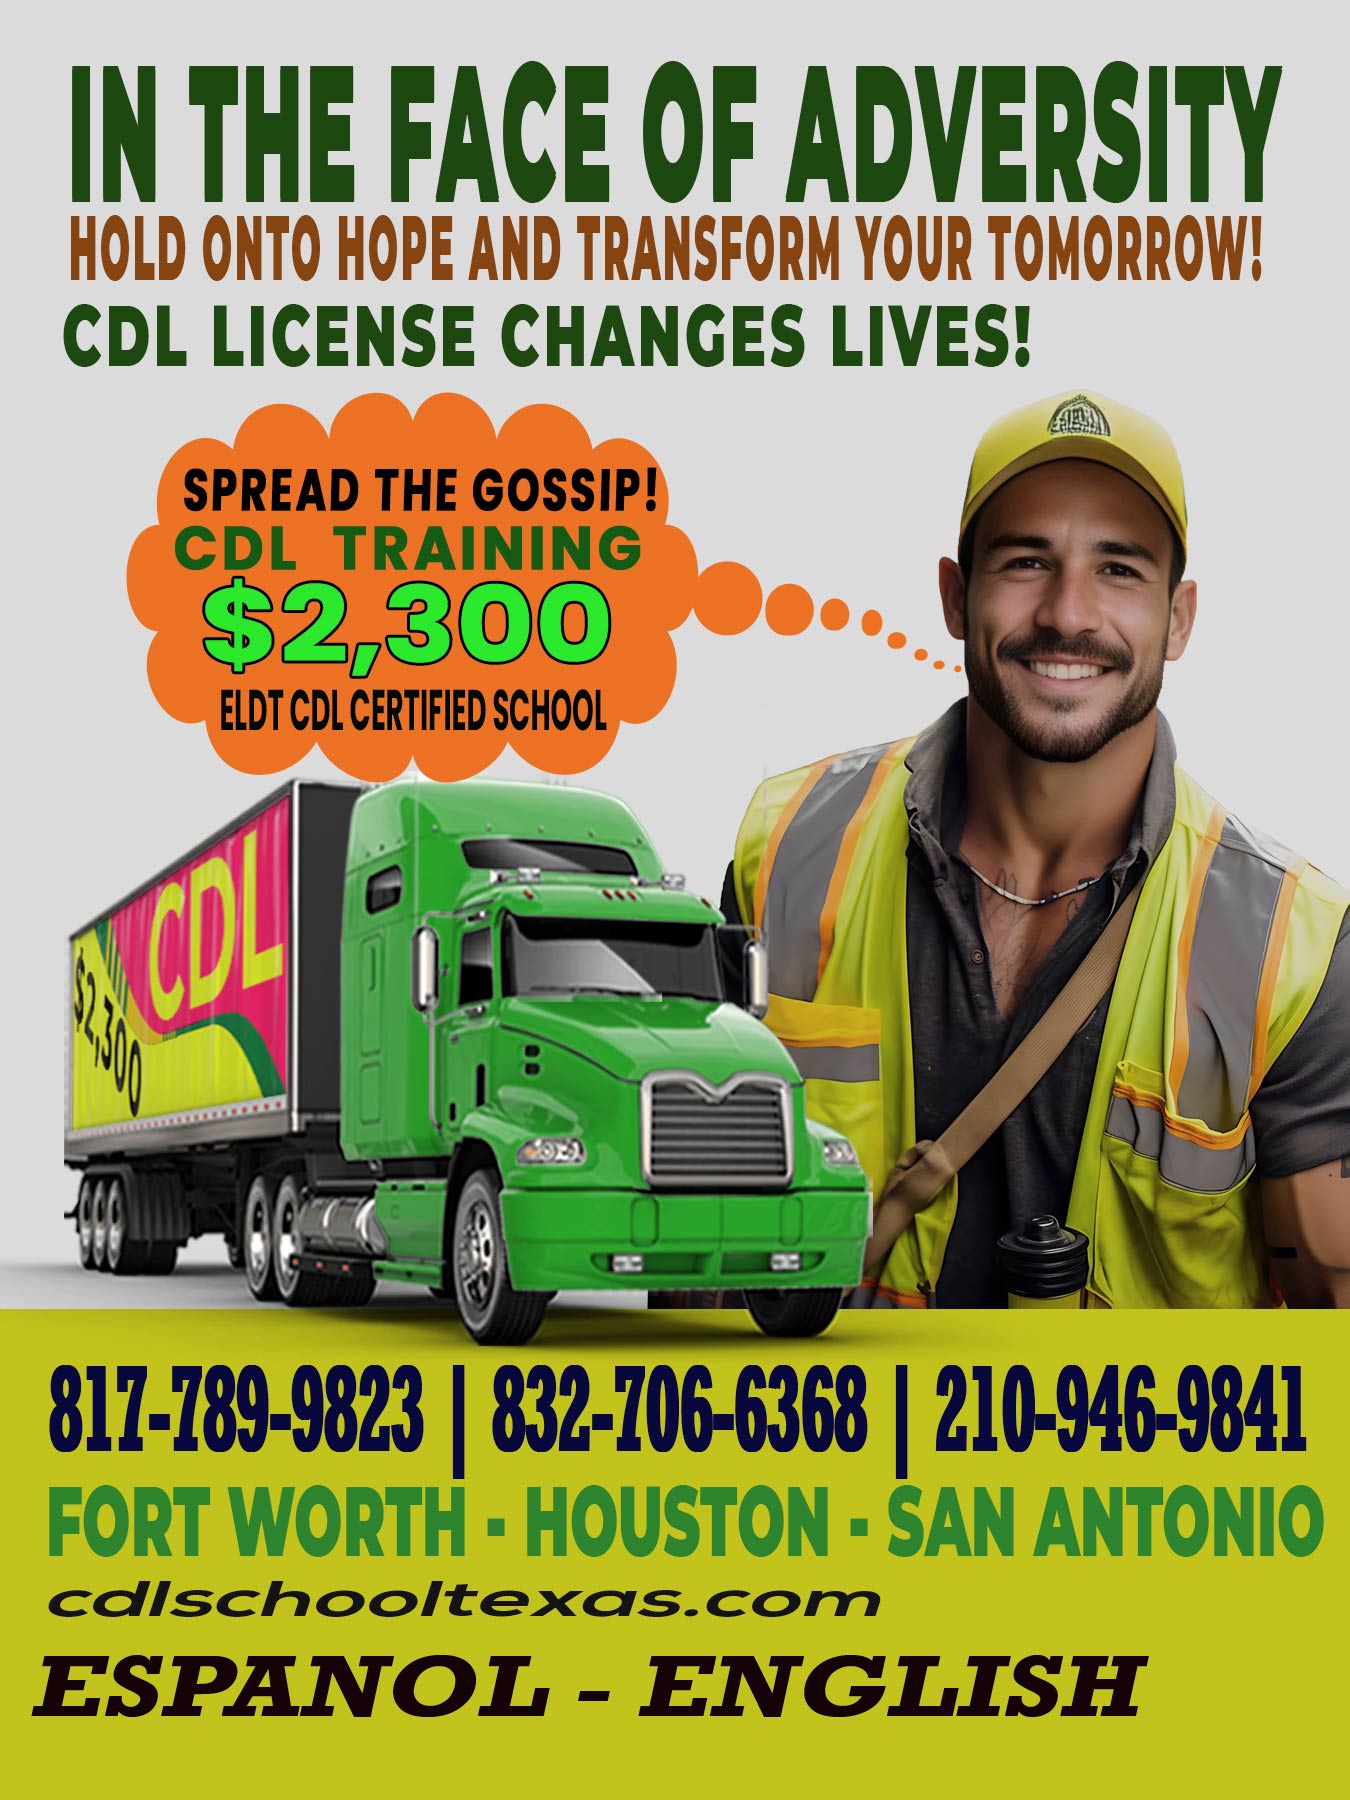 CDL training Killeen TX: Your Road to Success! And the following information: Services: CDL Training, Job Placement Locations: Pasadena, Houston, San Antonio, Fort Worth. Motivational Message: Unlock Your Potential! Training Image: Get Ready to Learn Truck: Your Vehicle to a Brighter Future